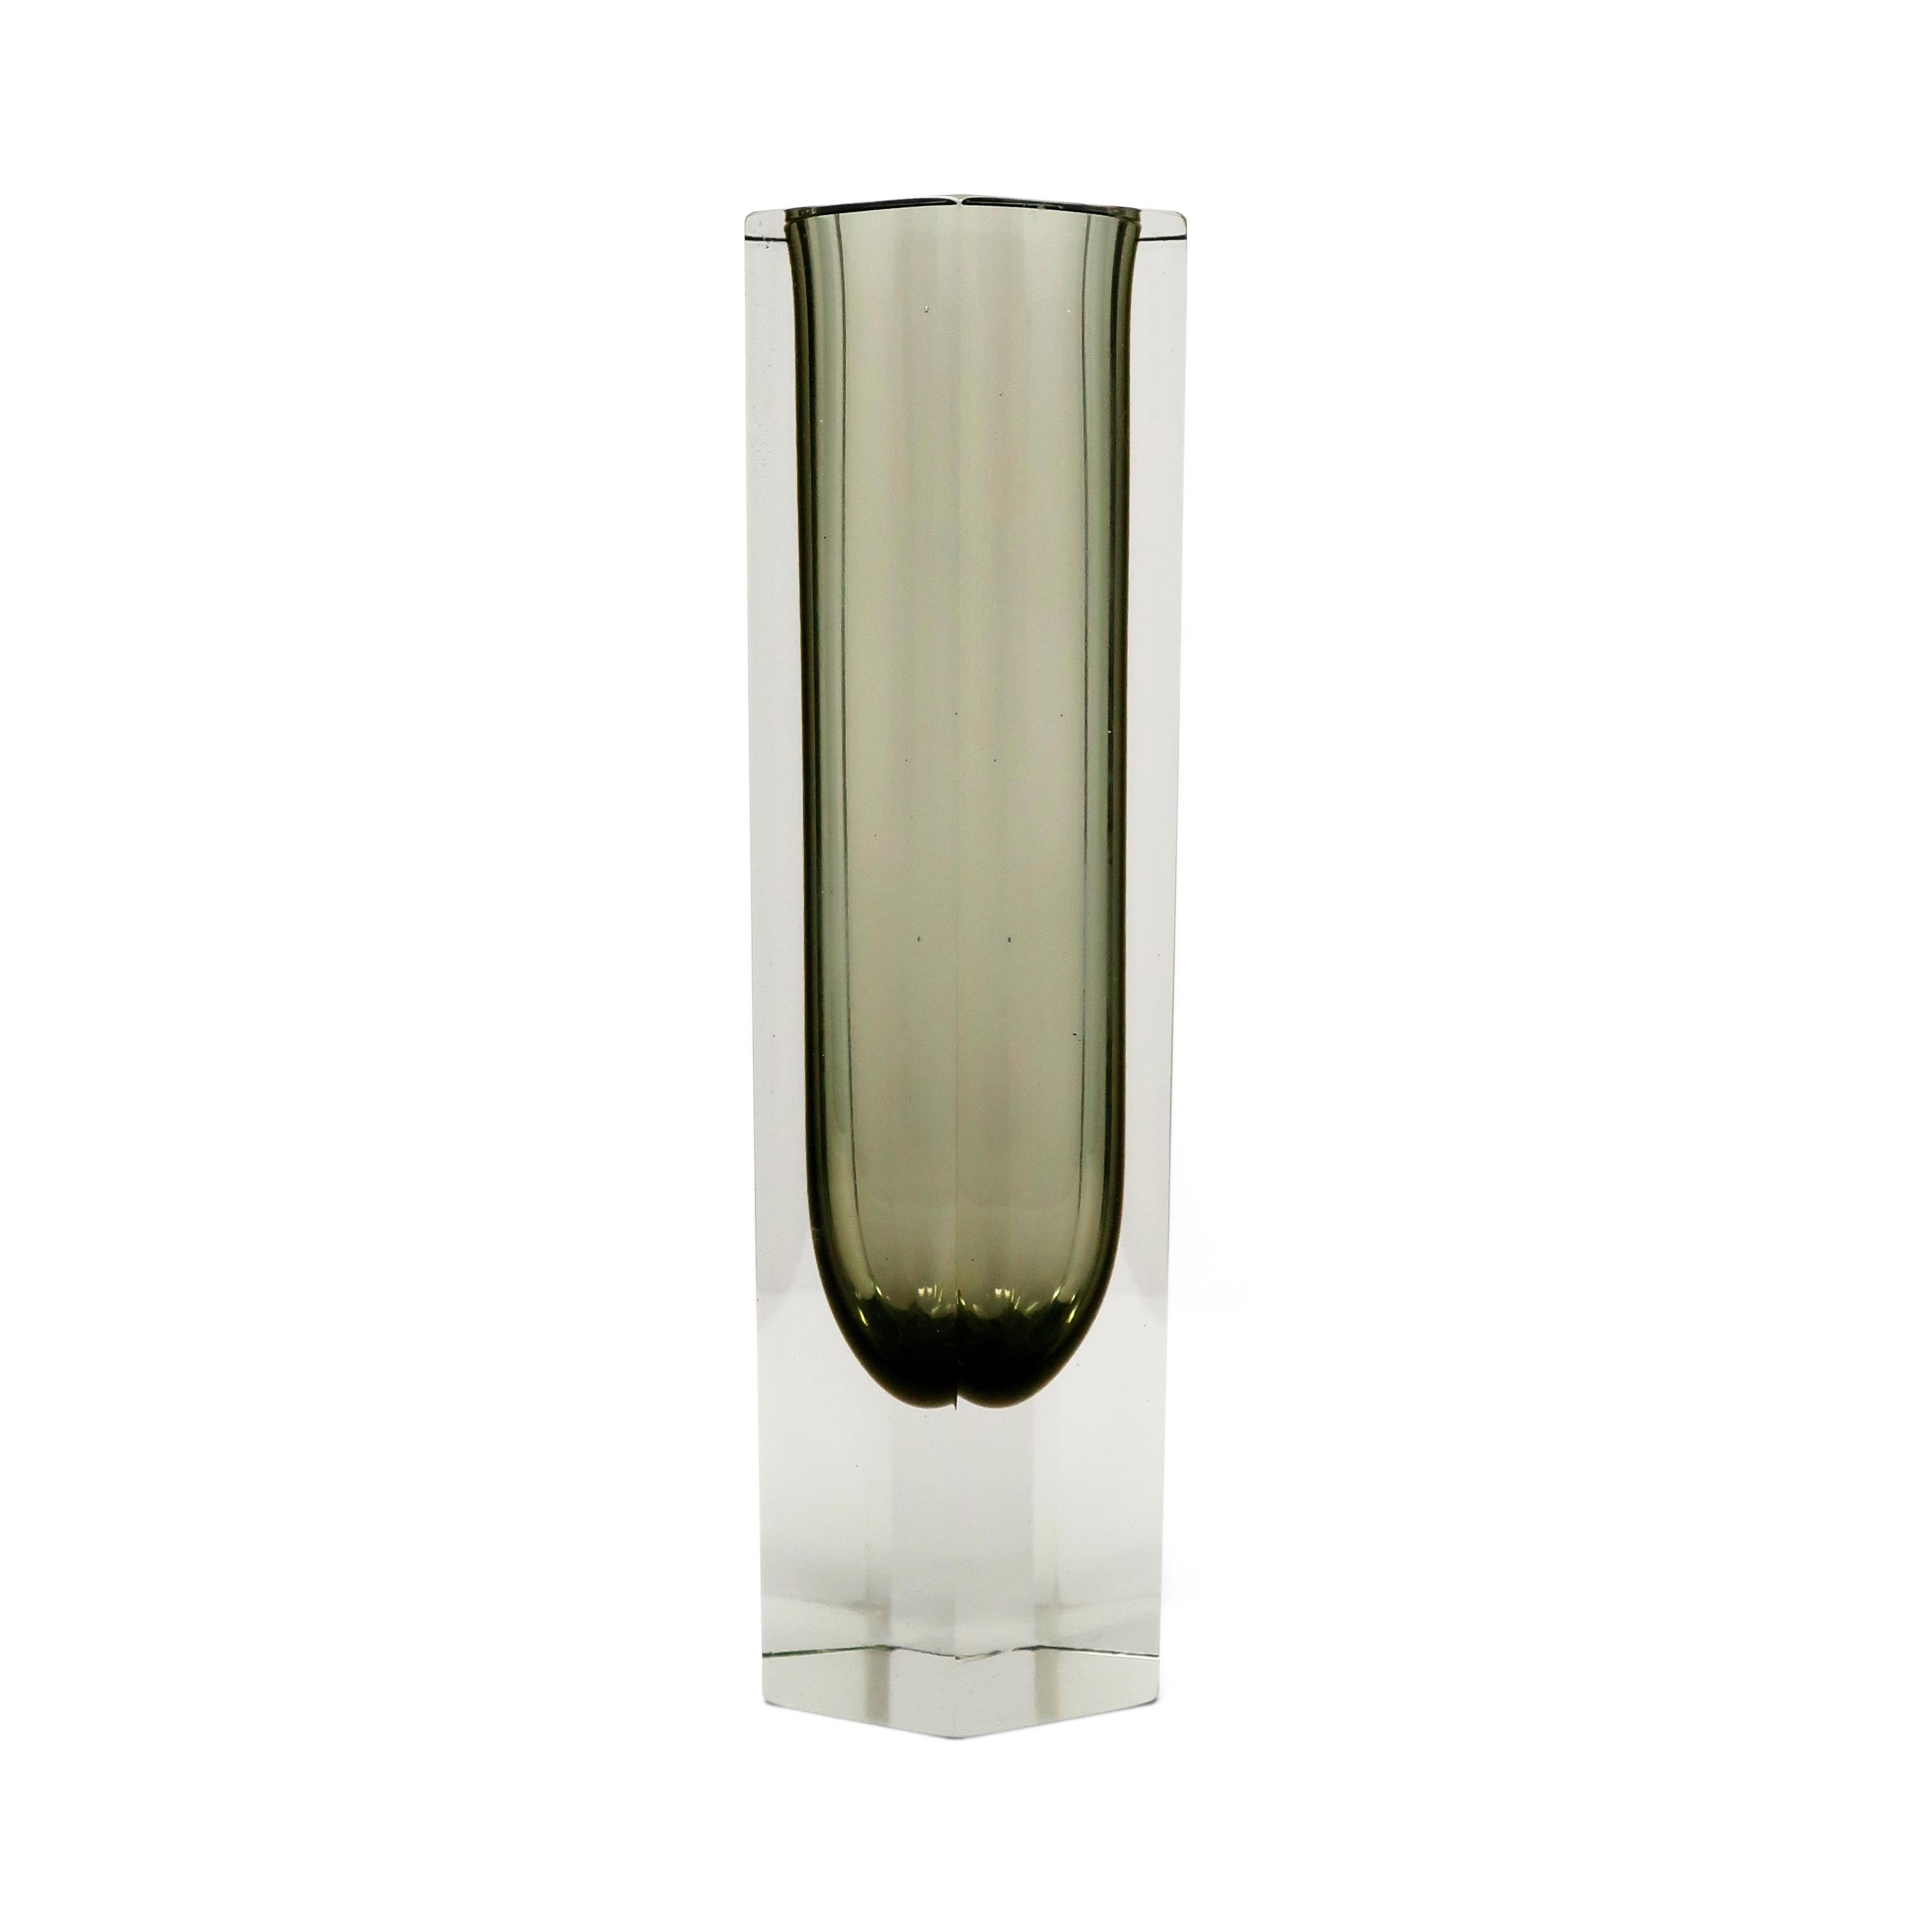 A gorgeous clear and grey glass vase in the style of Flavio Poli for Seguso Vetri d'Arte, Alessandro Mandruzzato, and Vincenzo Nason. Hexagonal gray glass is cased in a band of clear glass in the the renowned Italian Sommerso technique often